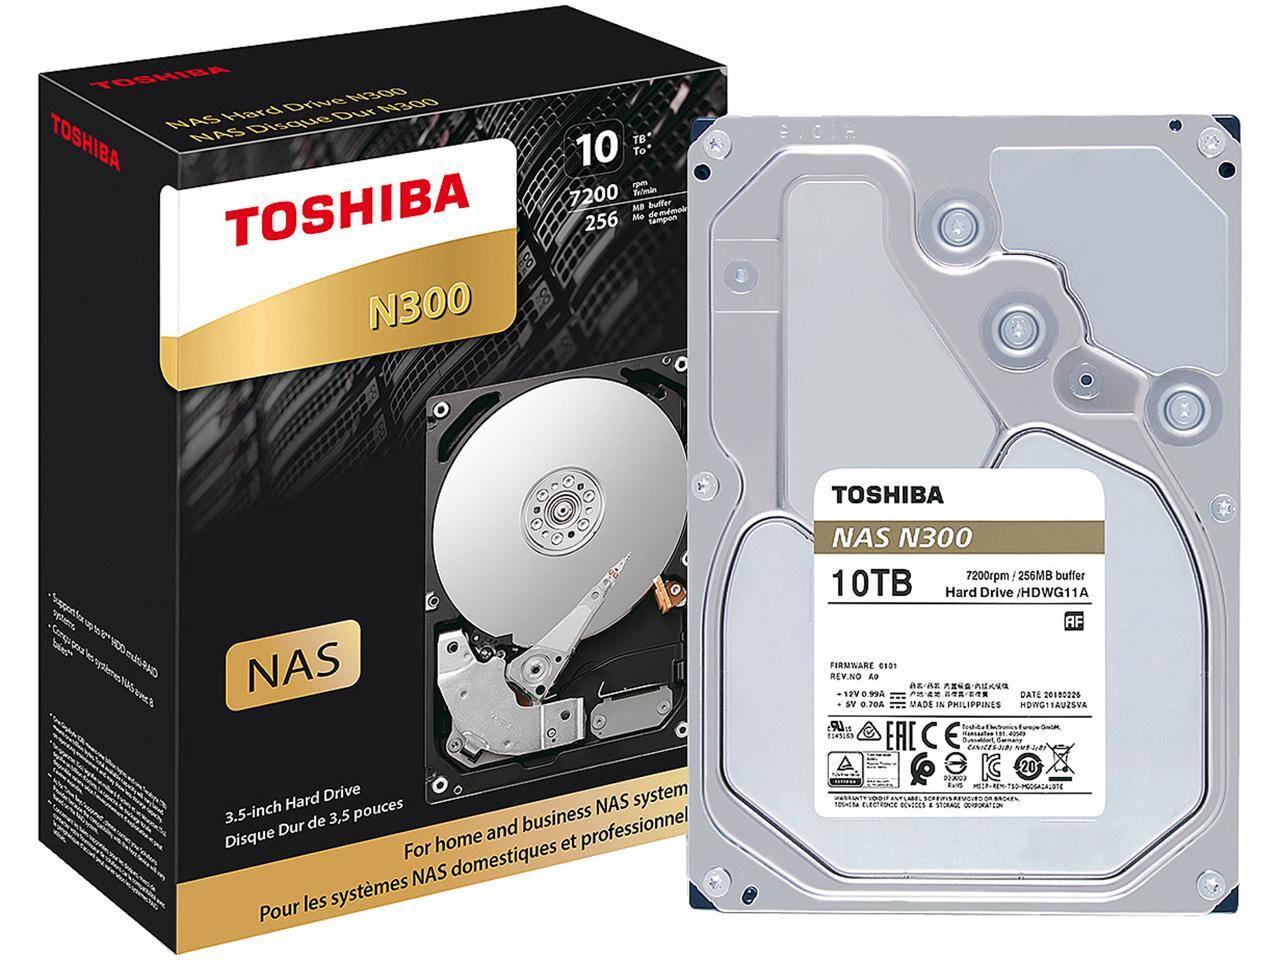 TOSHIBA N300 10TB NAS Hard Drive [7200 RPM, SATA 6.0Gb/s, 256MB] (HDWG11AXZSTA) for $219.99 w/ FS after Code